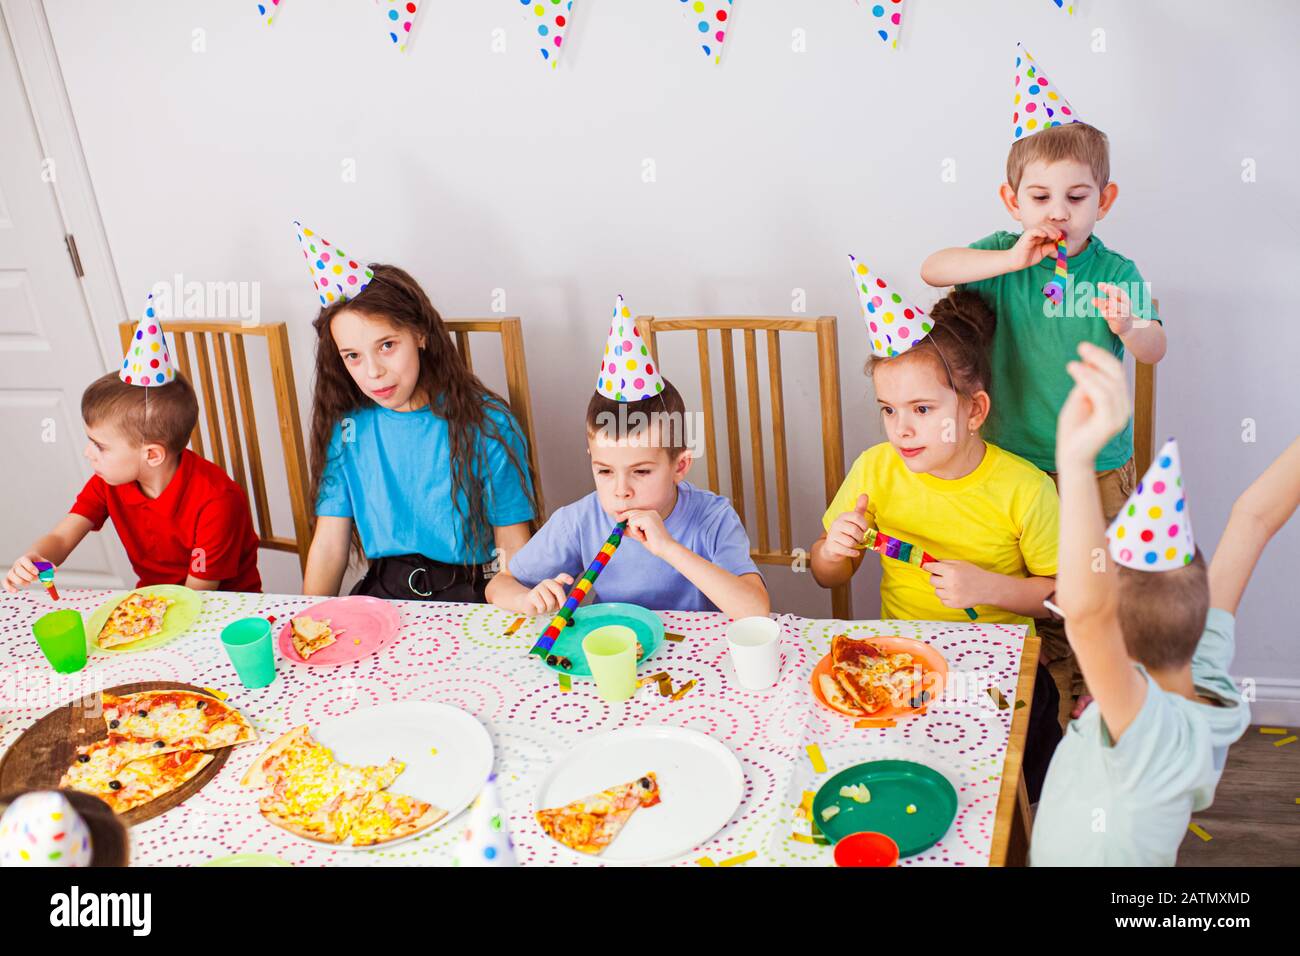 Kids celebrating a birthday with a pizza at cafe. Birthday party. Cute children in birthday hats having fun together Stock Photo